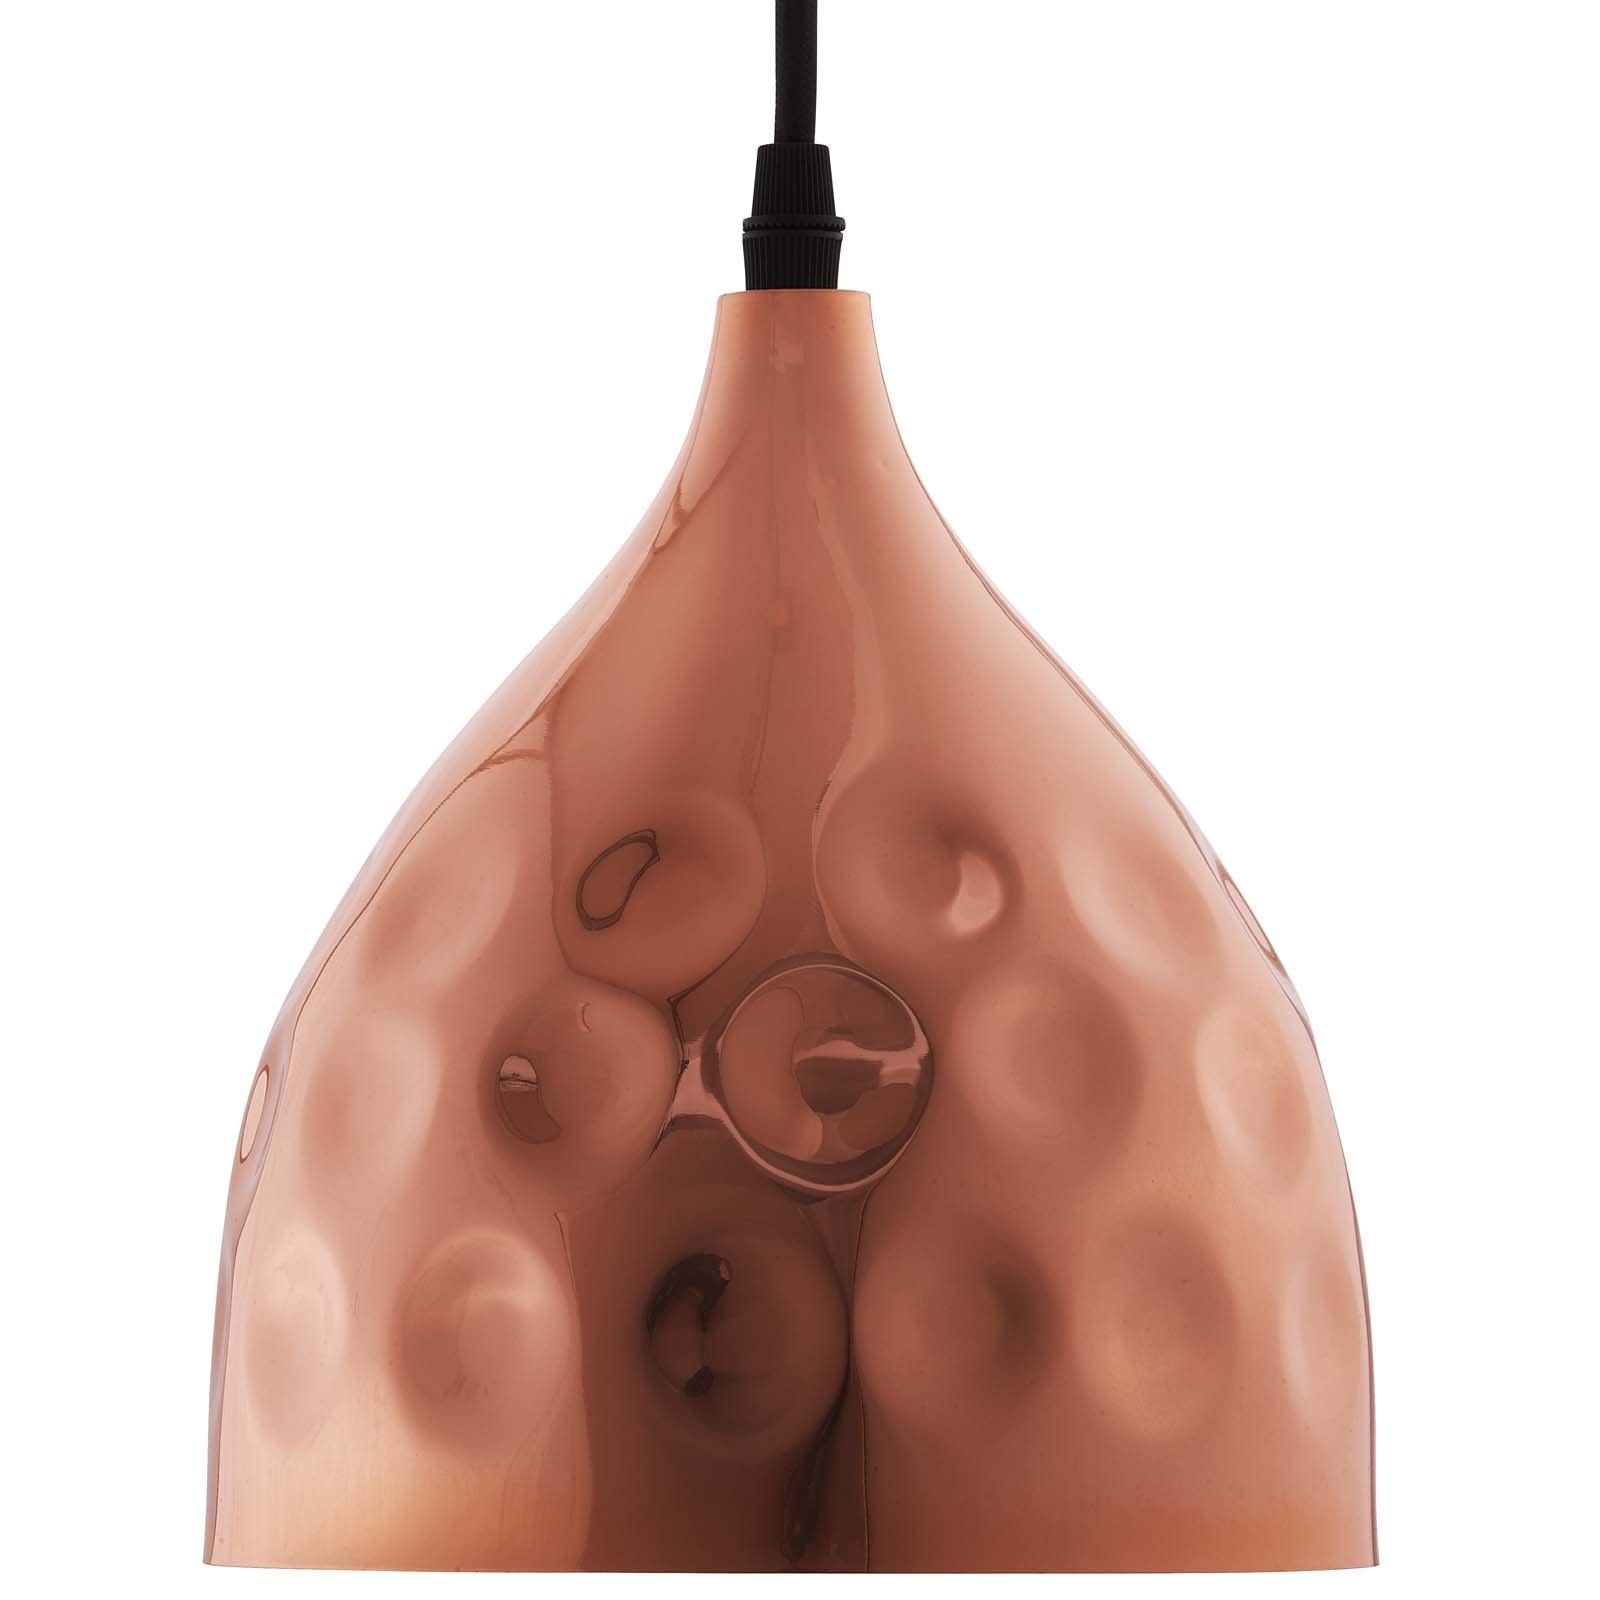 Modway Dimple 6.5" Bell-Shaped Rose Gold Pendant Light FredCo